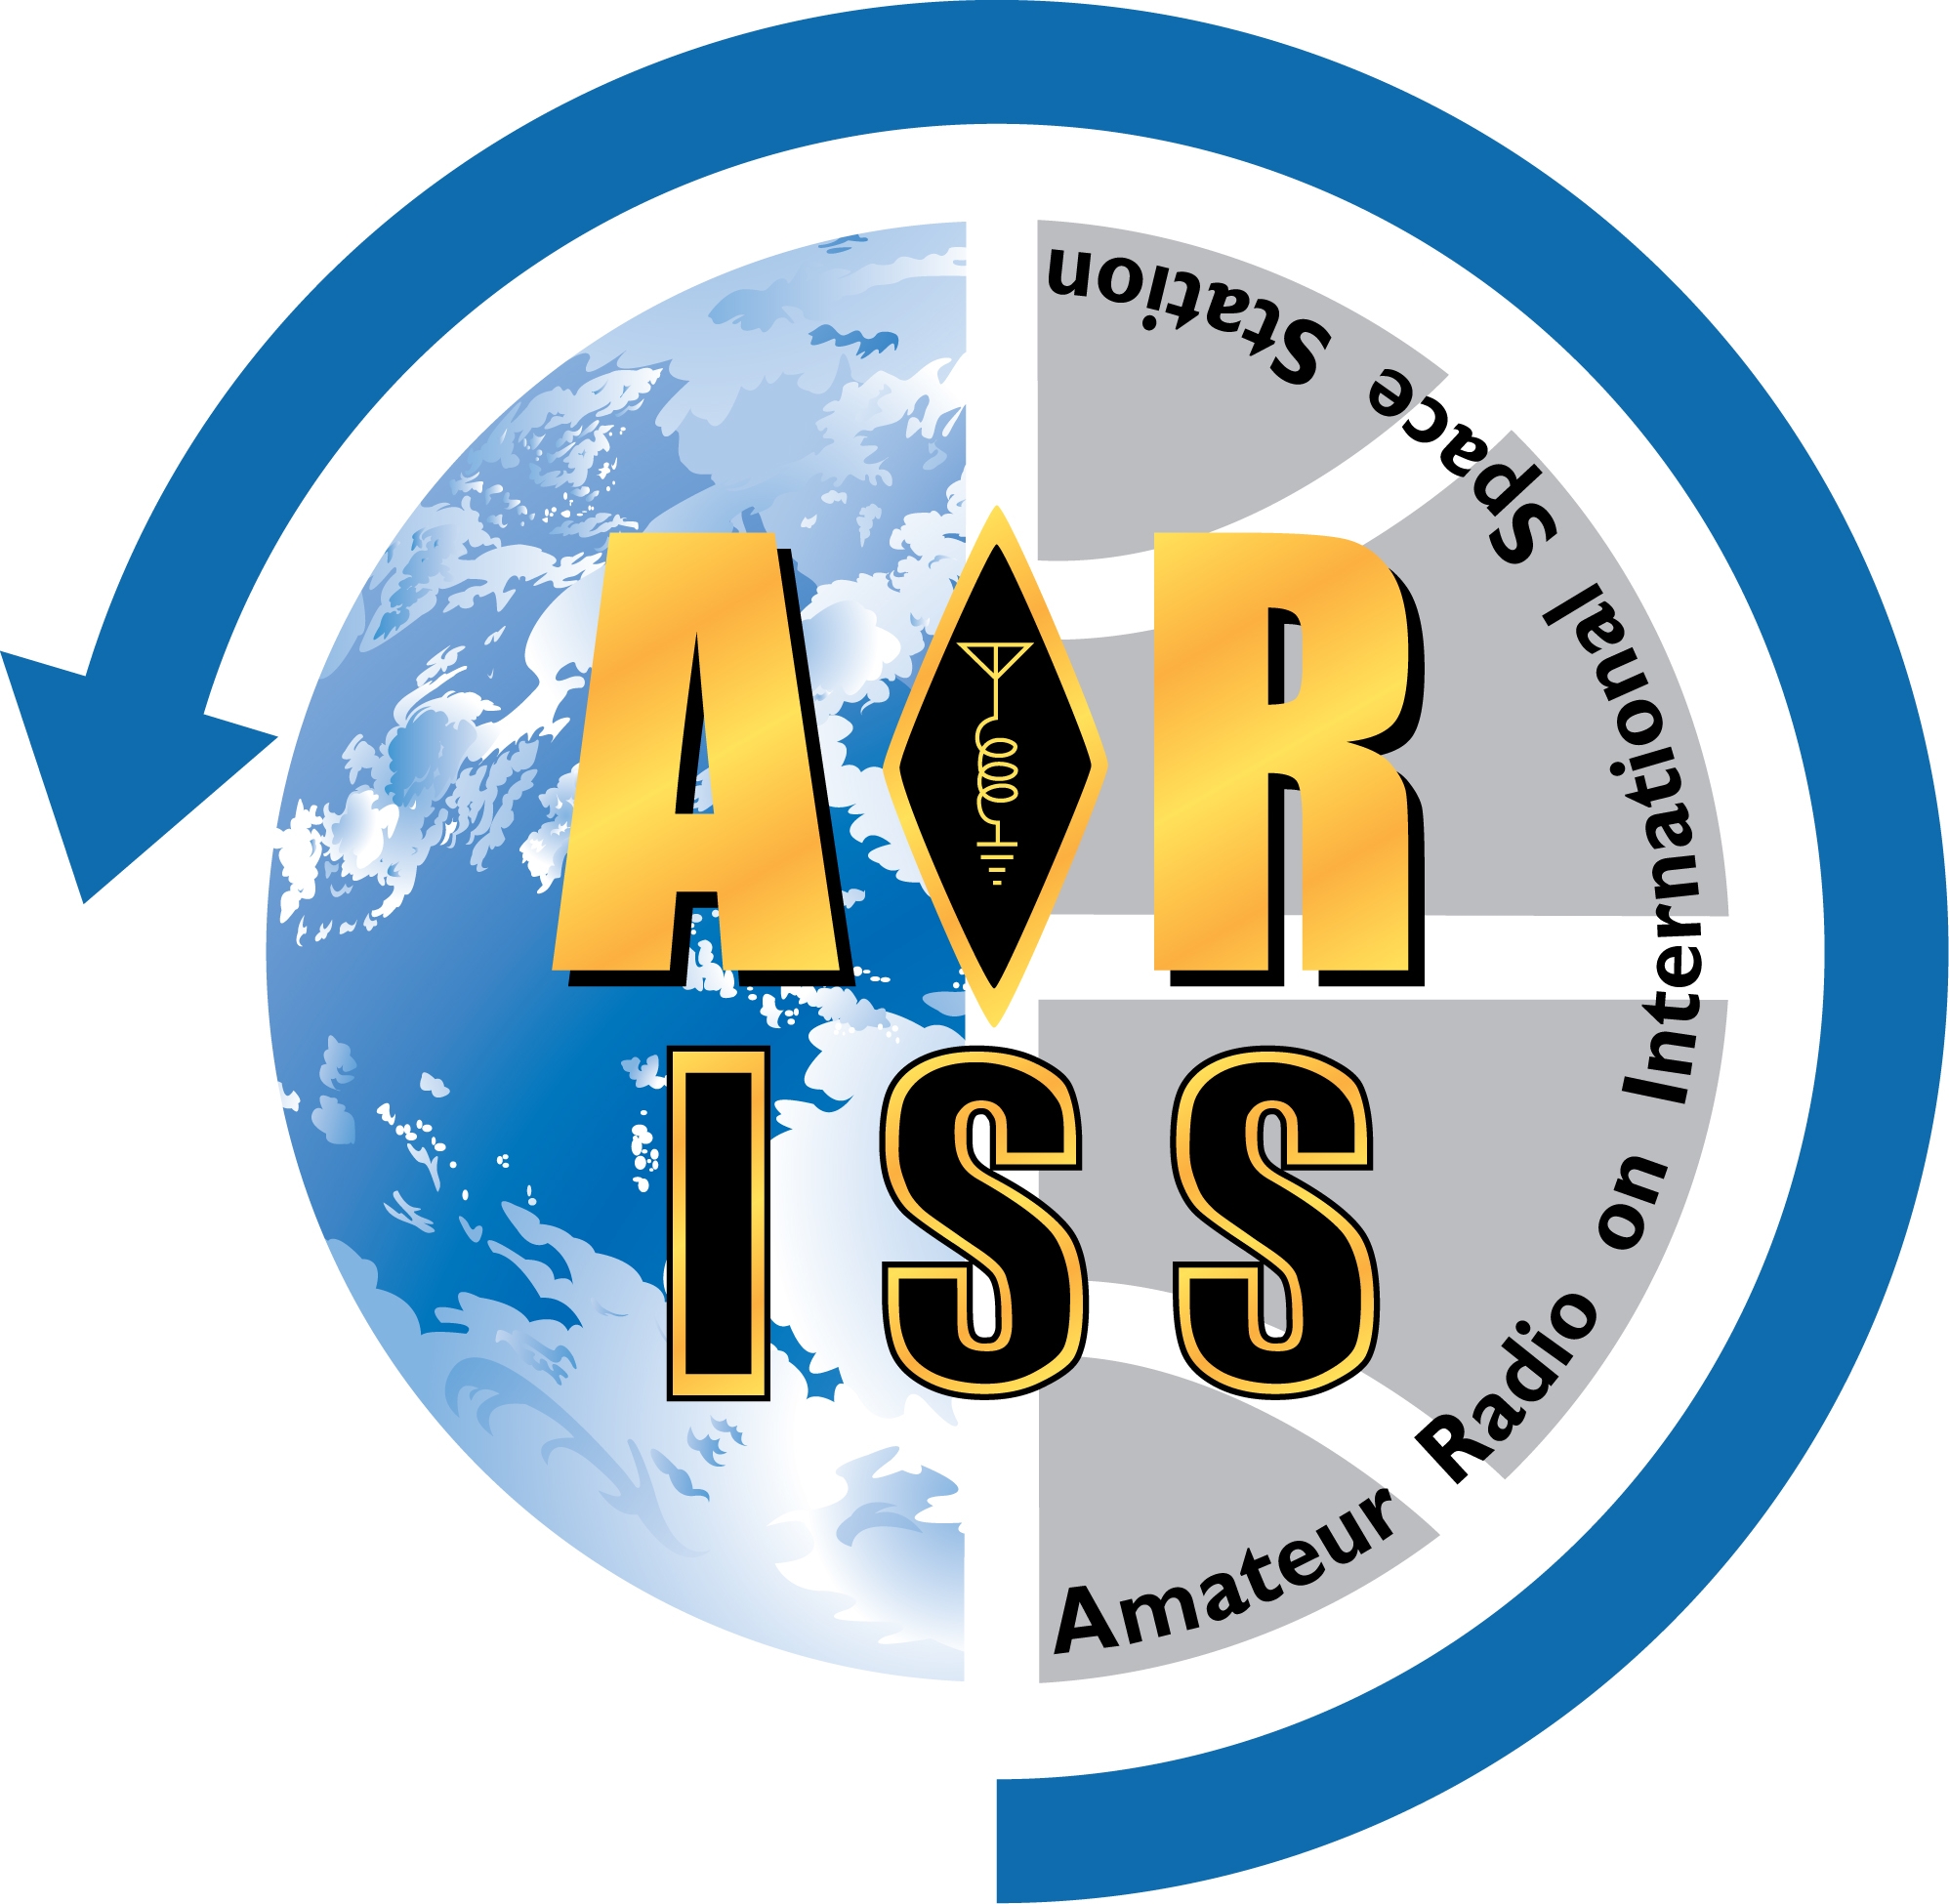 ARISS contact for Powys school with Tim Peake